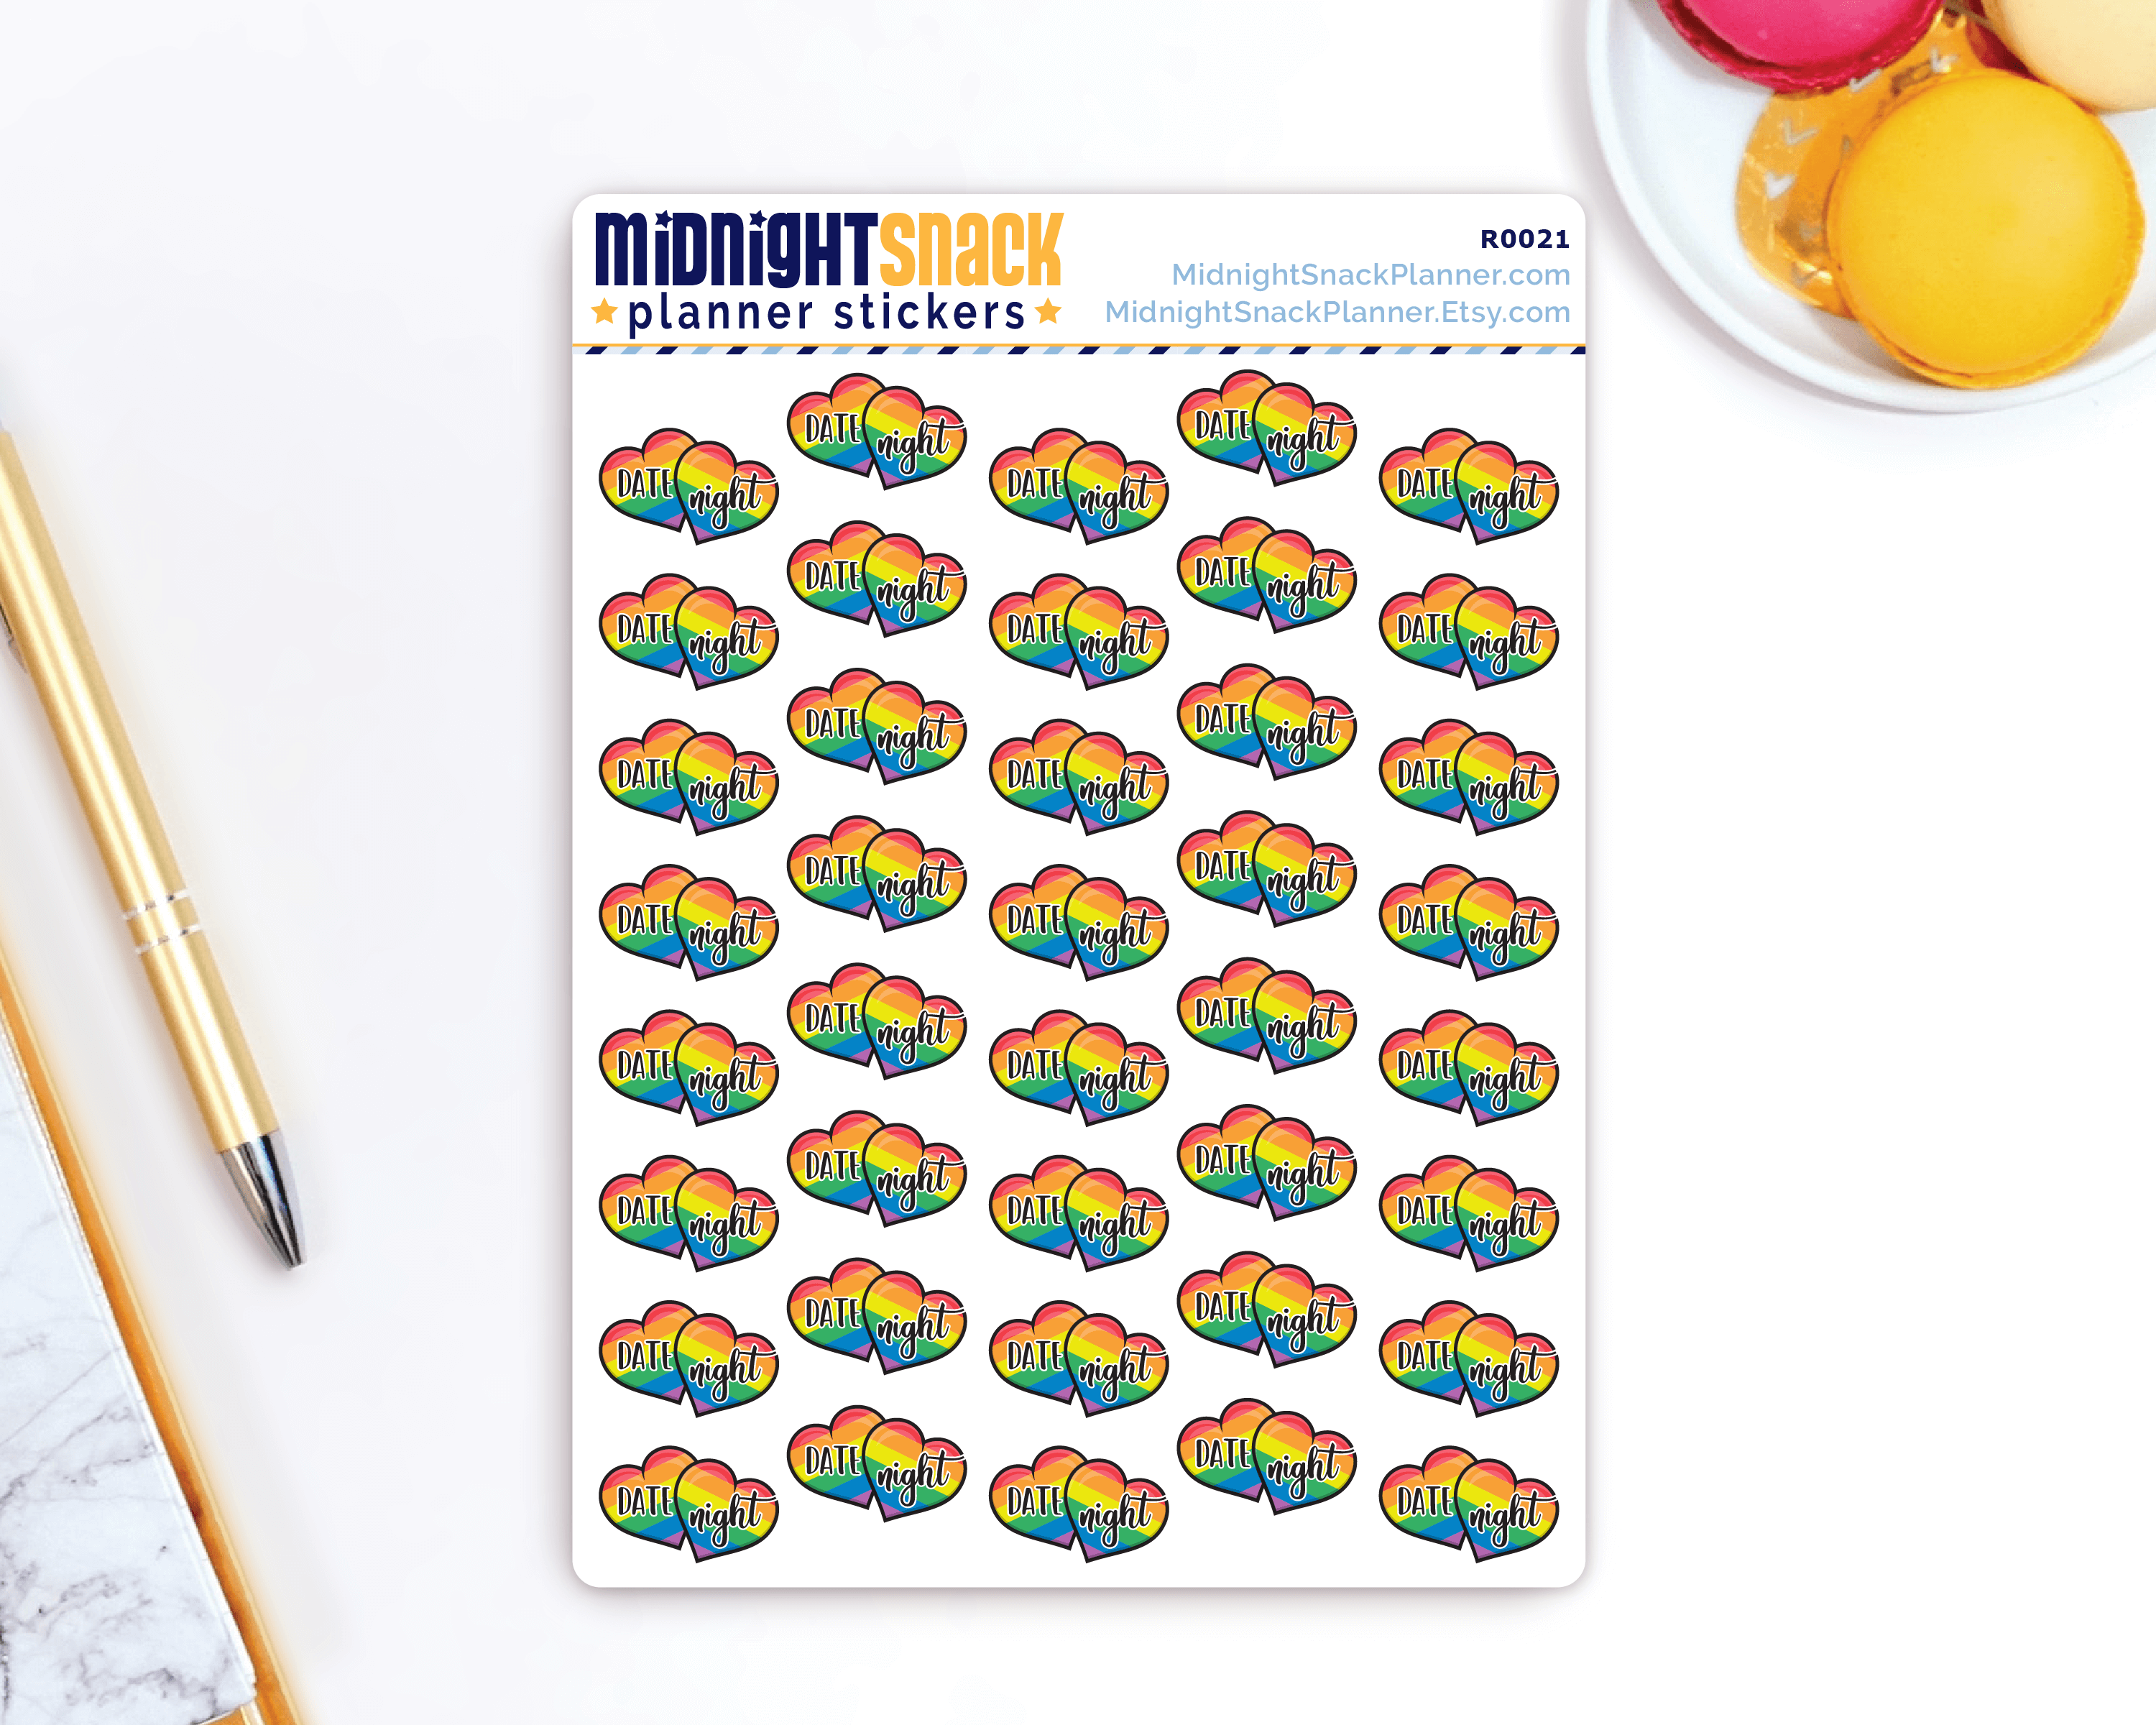 Pride Double Heart Icon: Date Night Planner Stickers: Midnight Snack Planner Stickers